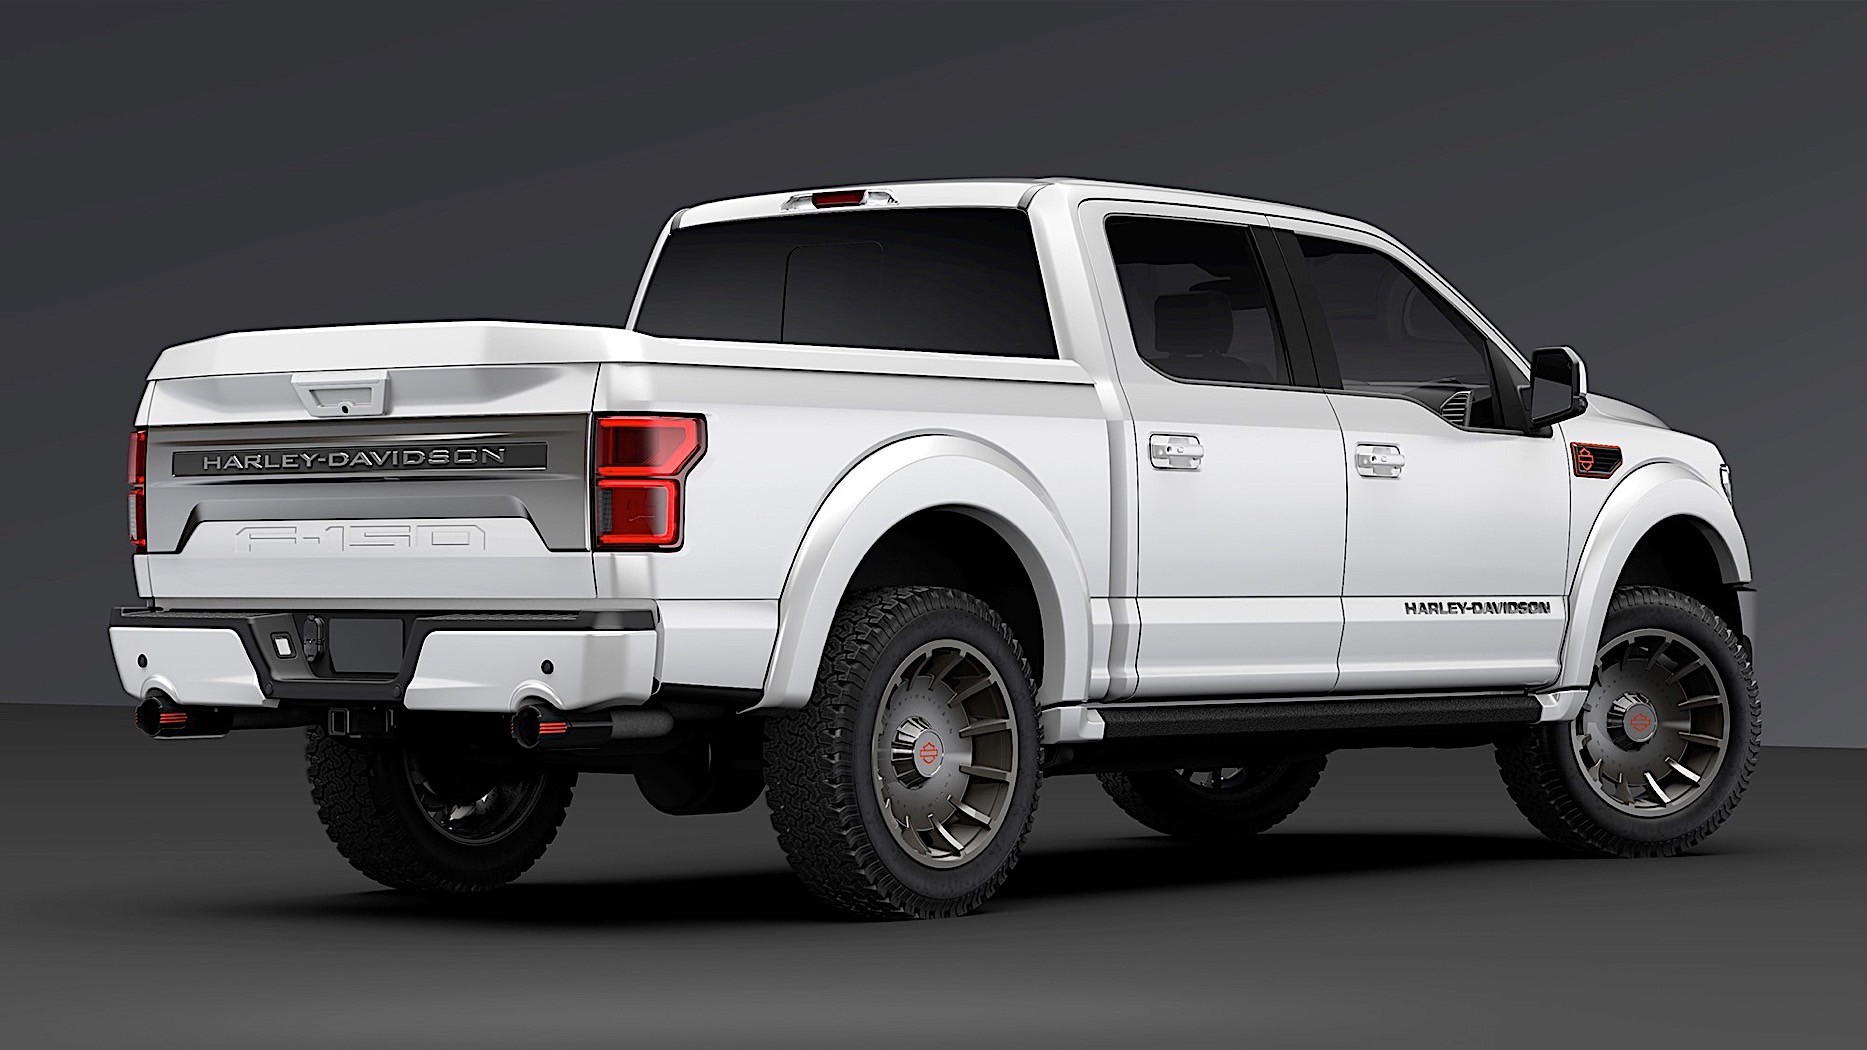  2019 Harley Davidson Ford F 150 Pickup Truck Priced from 